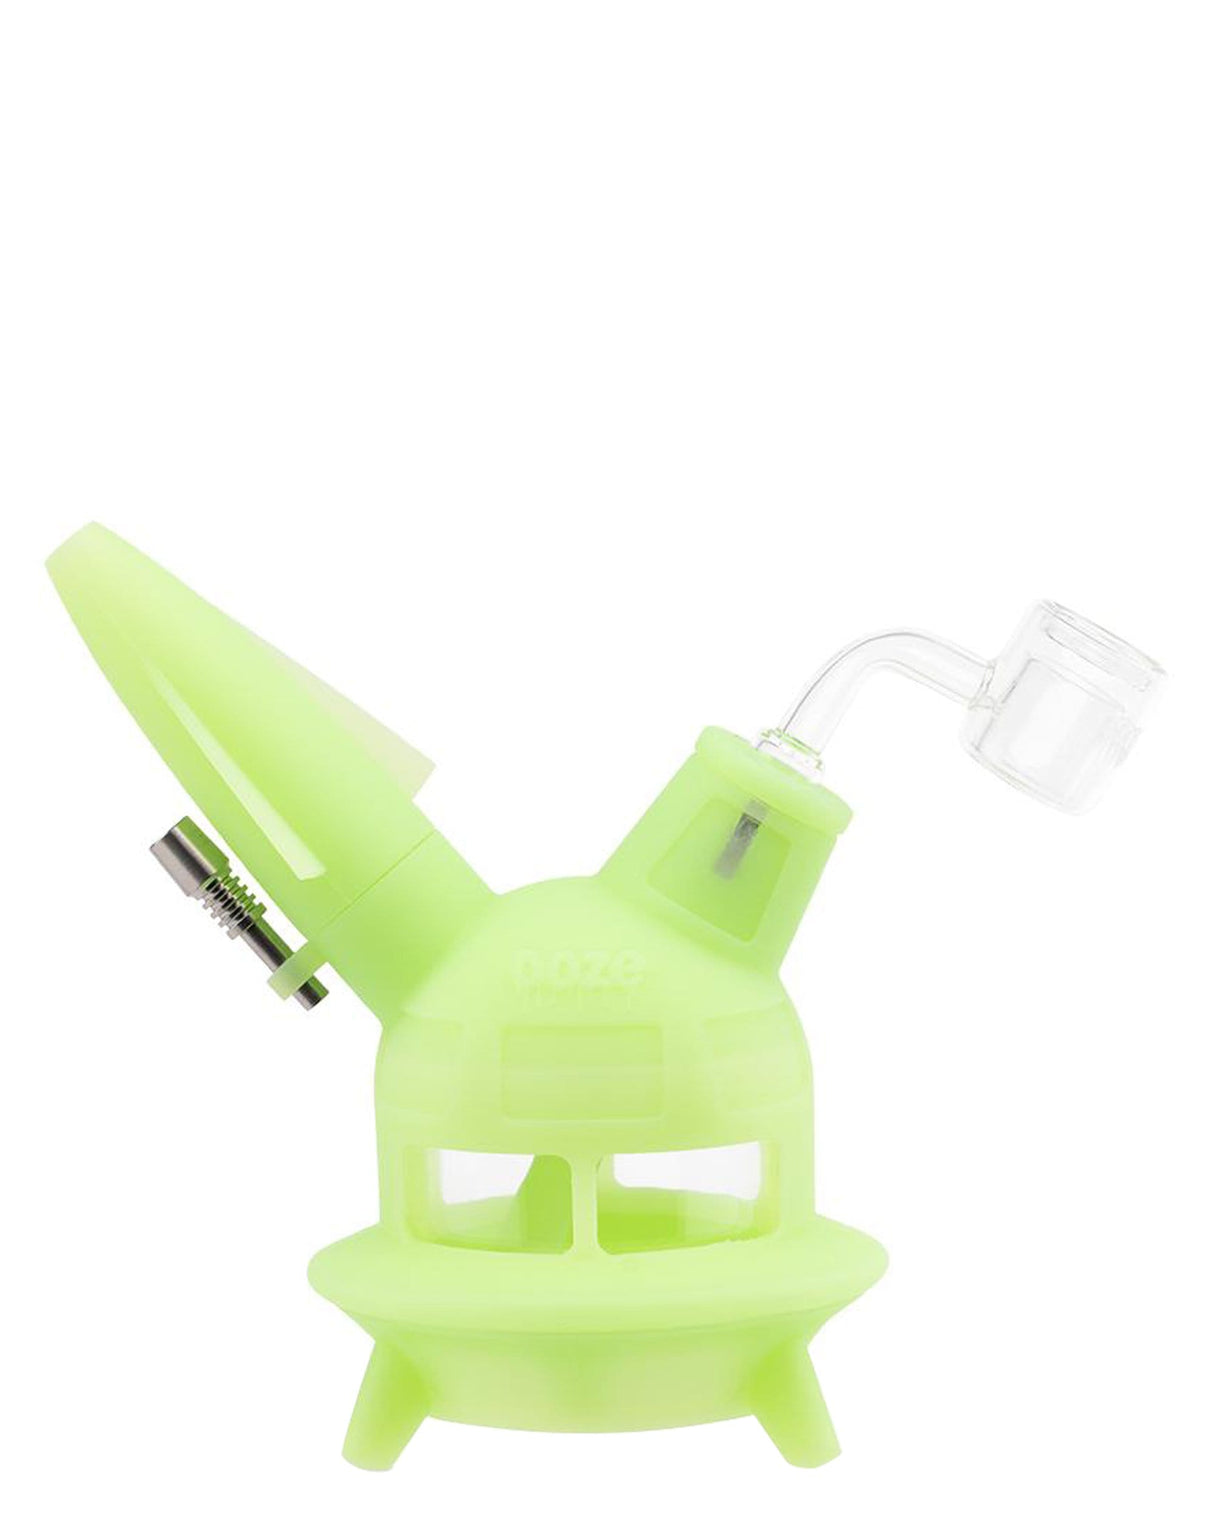 Ooze - UFO Silicone Bong in Glow in the Dark Green with Slitted Percolator and Borosilicate Glass